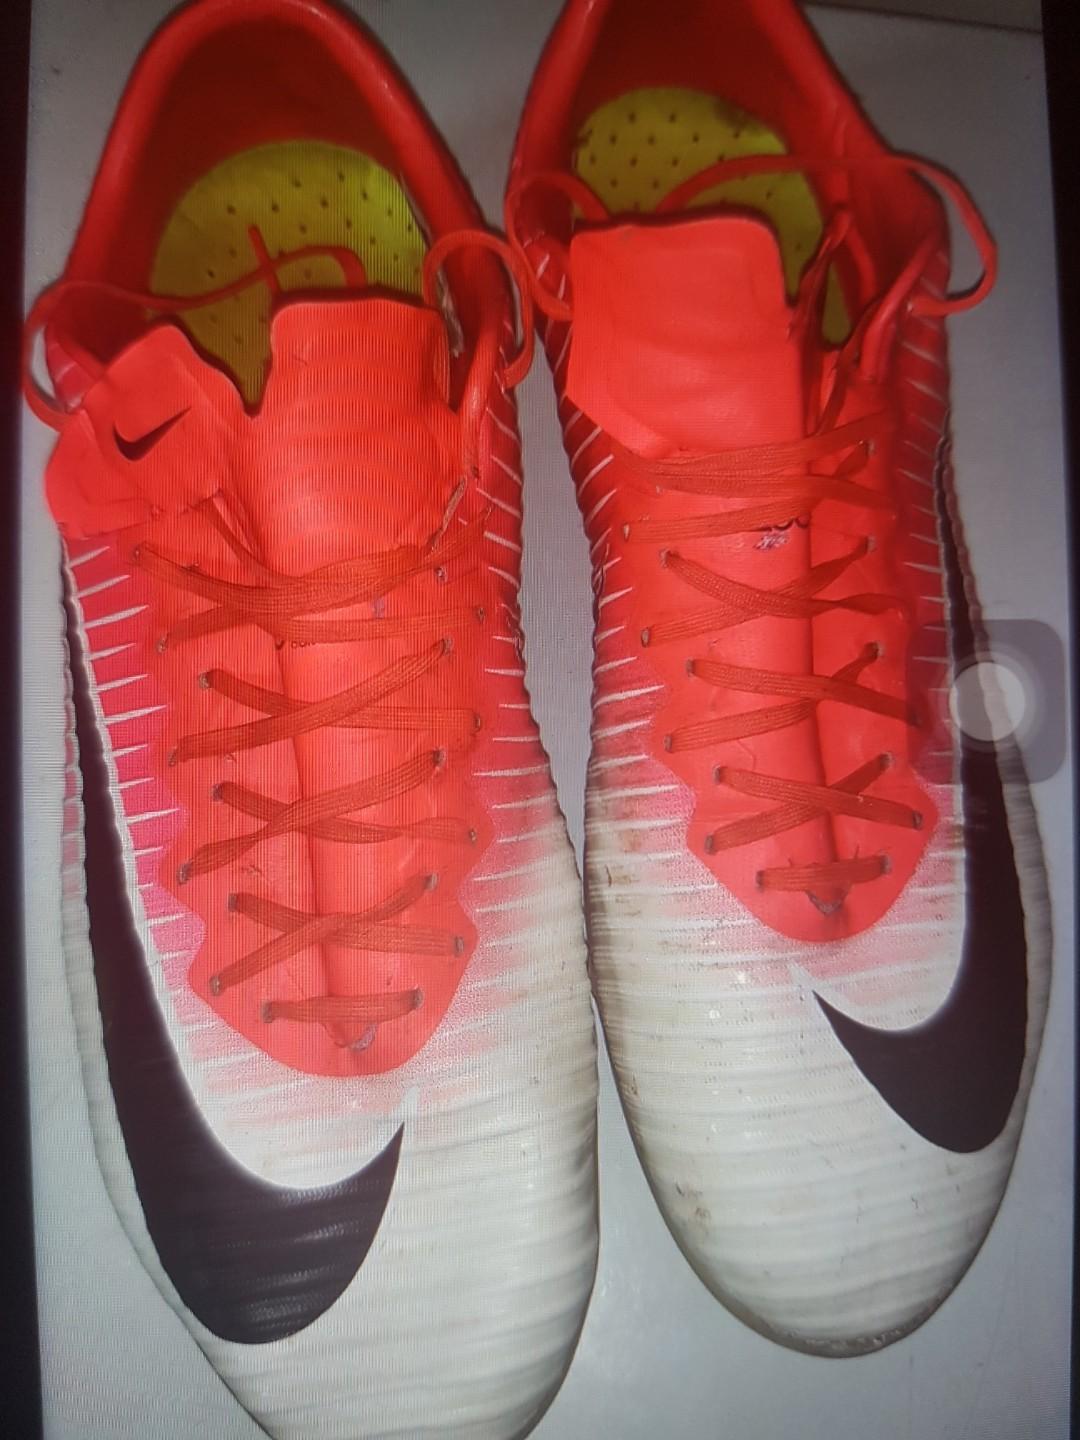 metal stud football boots for sale